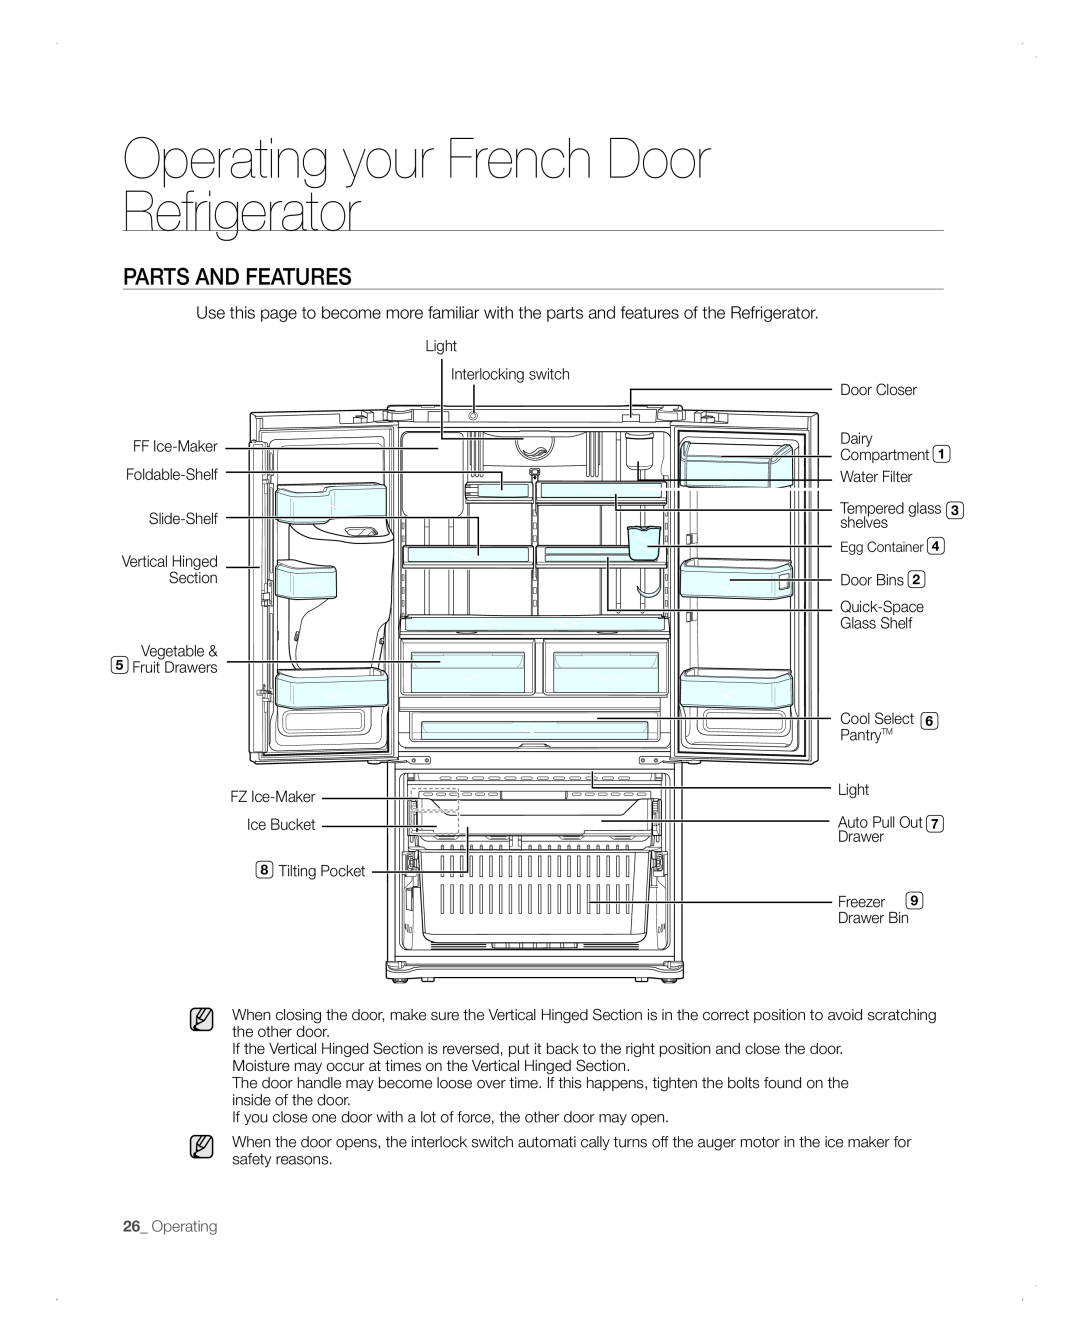 Samsung RFG298AARS user manual Parts And Features, Operating your French Door Refrigerator 